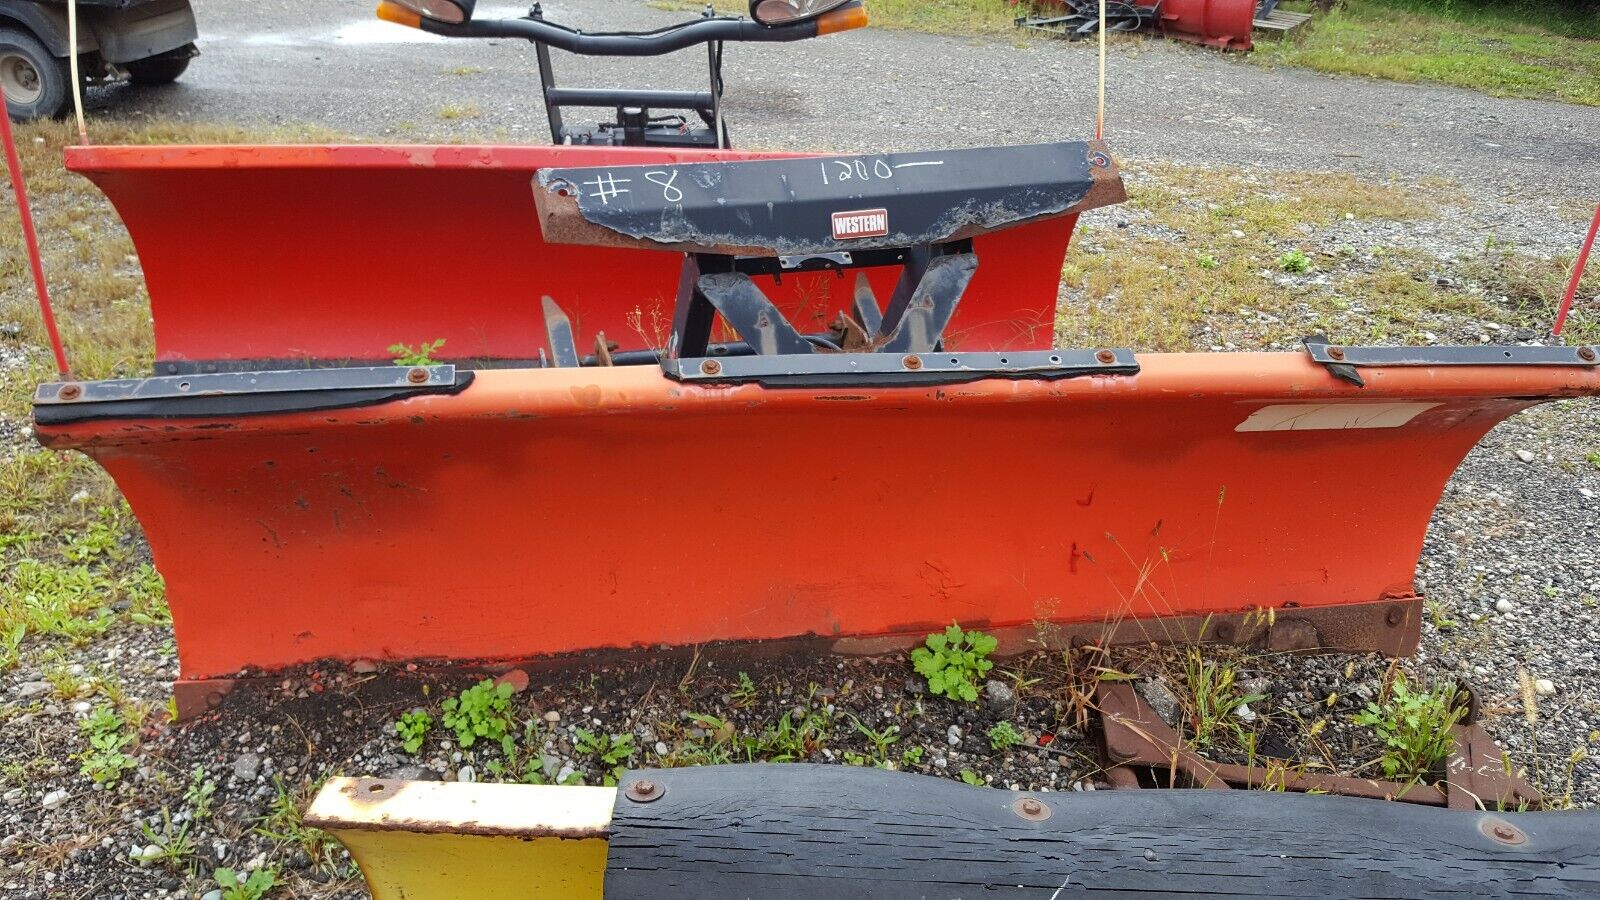 WESTERN ULTRA MOUNT 7.6 FT SNOWPLOW REPAIR OR #8 New Direct sale of manufacturer York Mall FOR PARTS